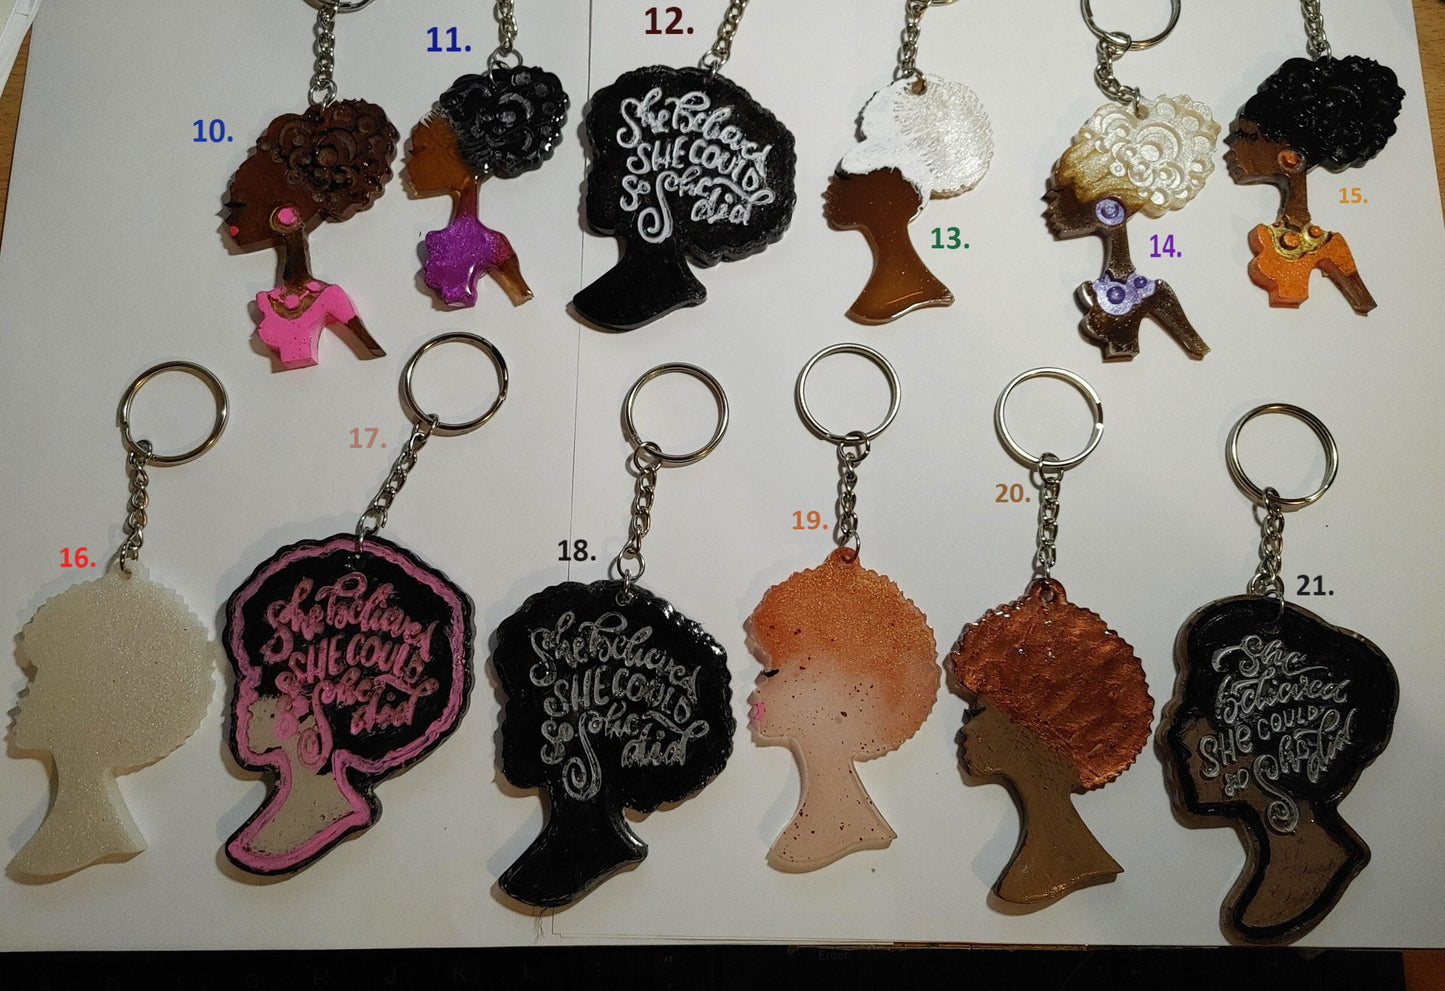 Afro American Women Keychains